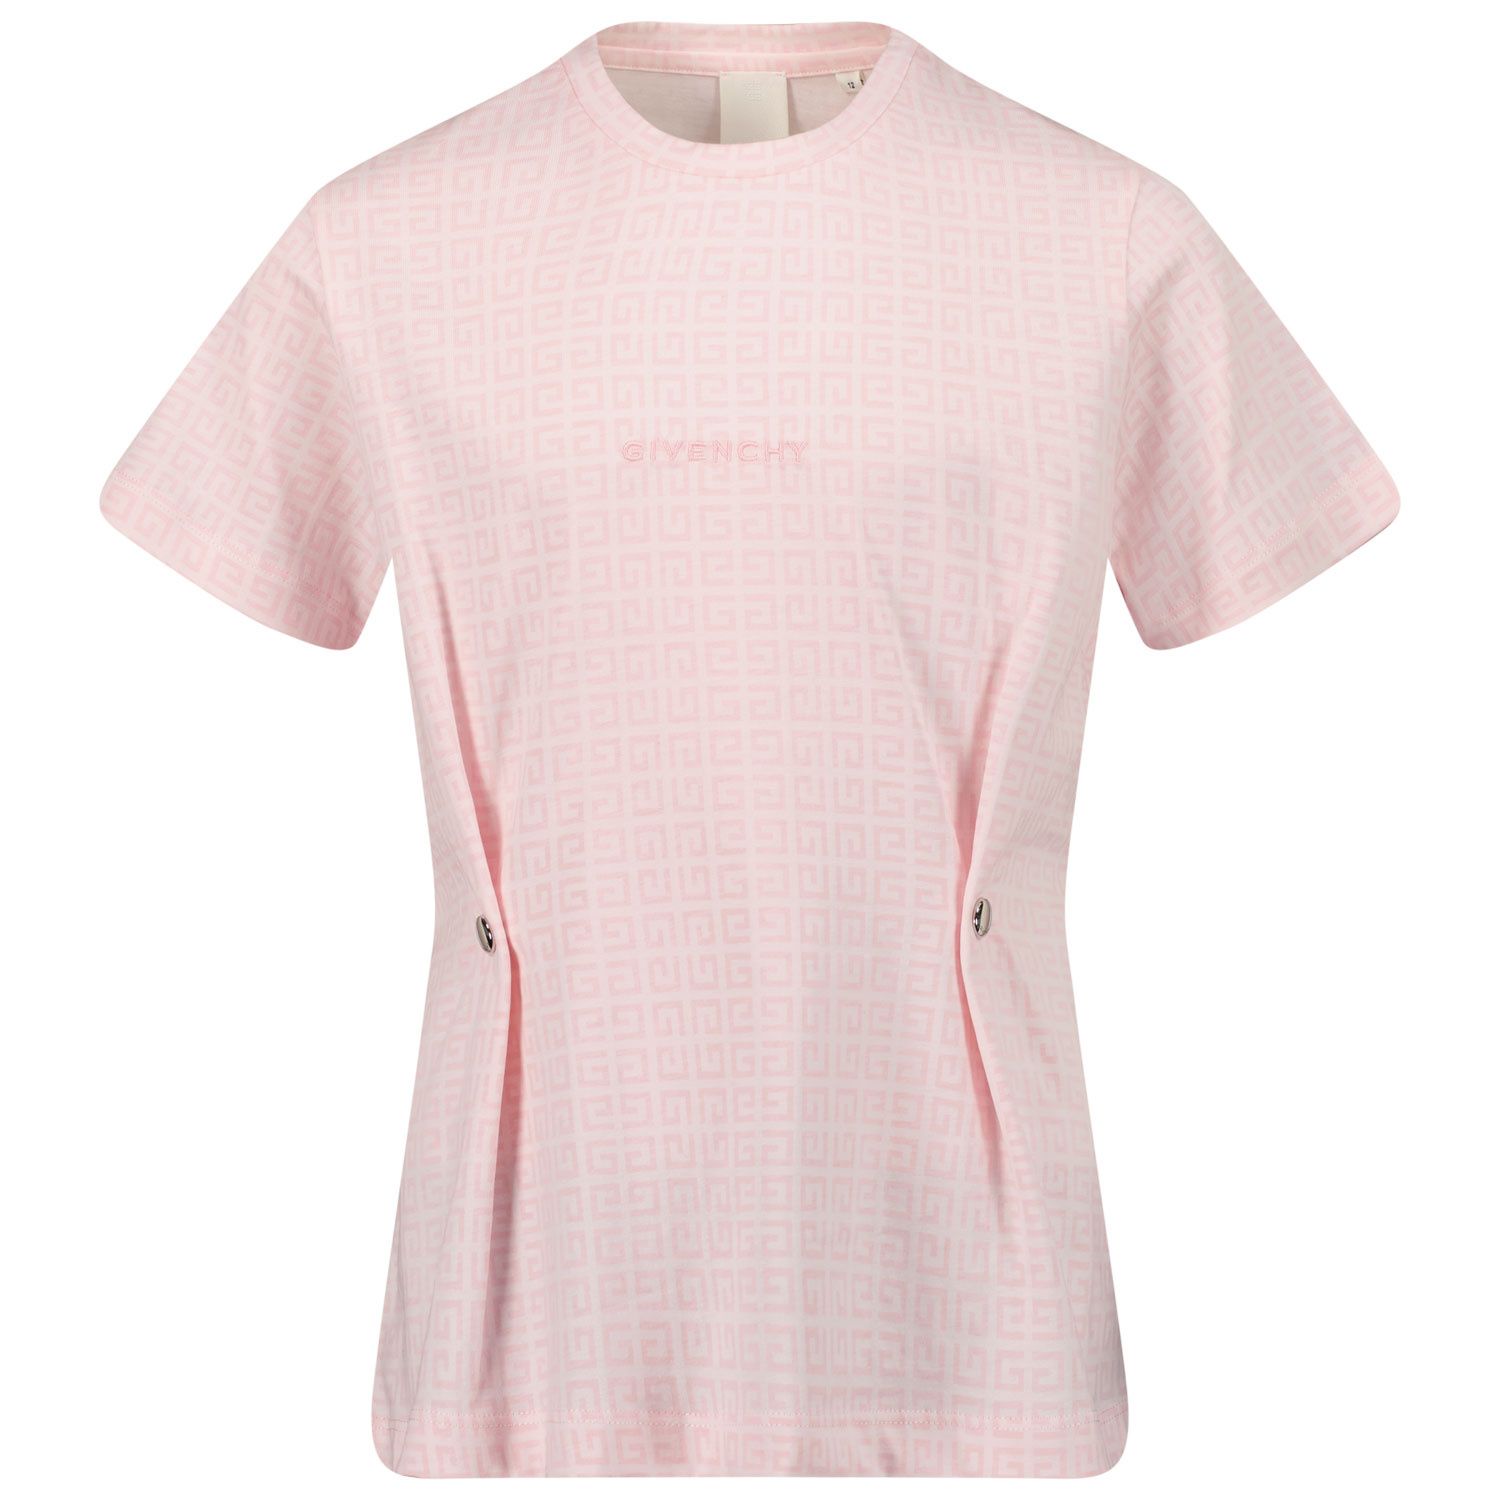 Picture of Givenchy H15245 kids t-shirt light pink